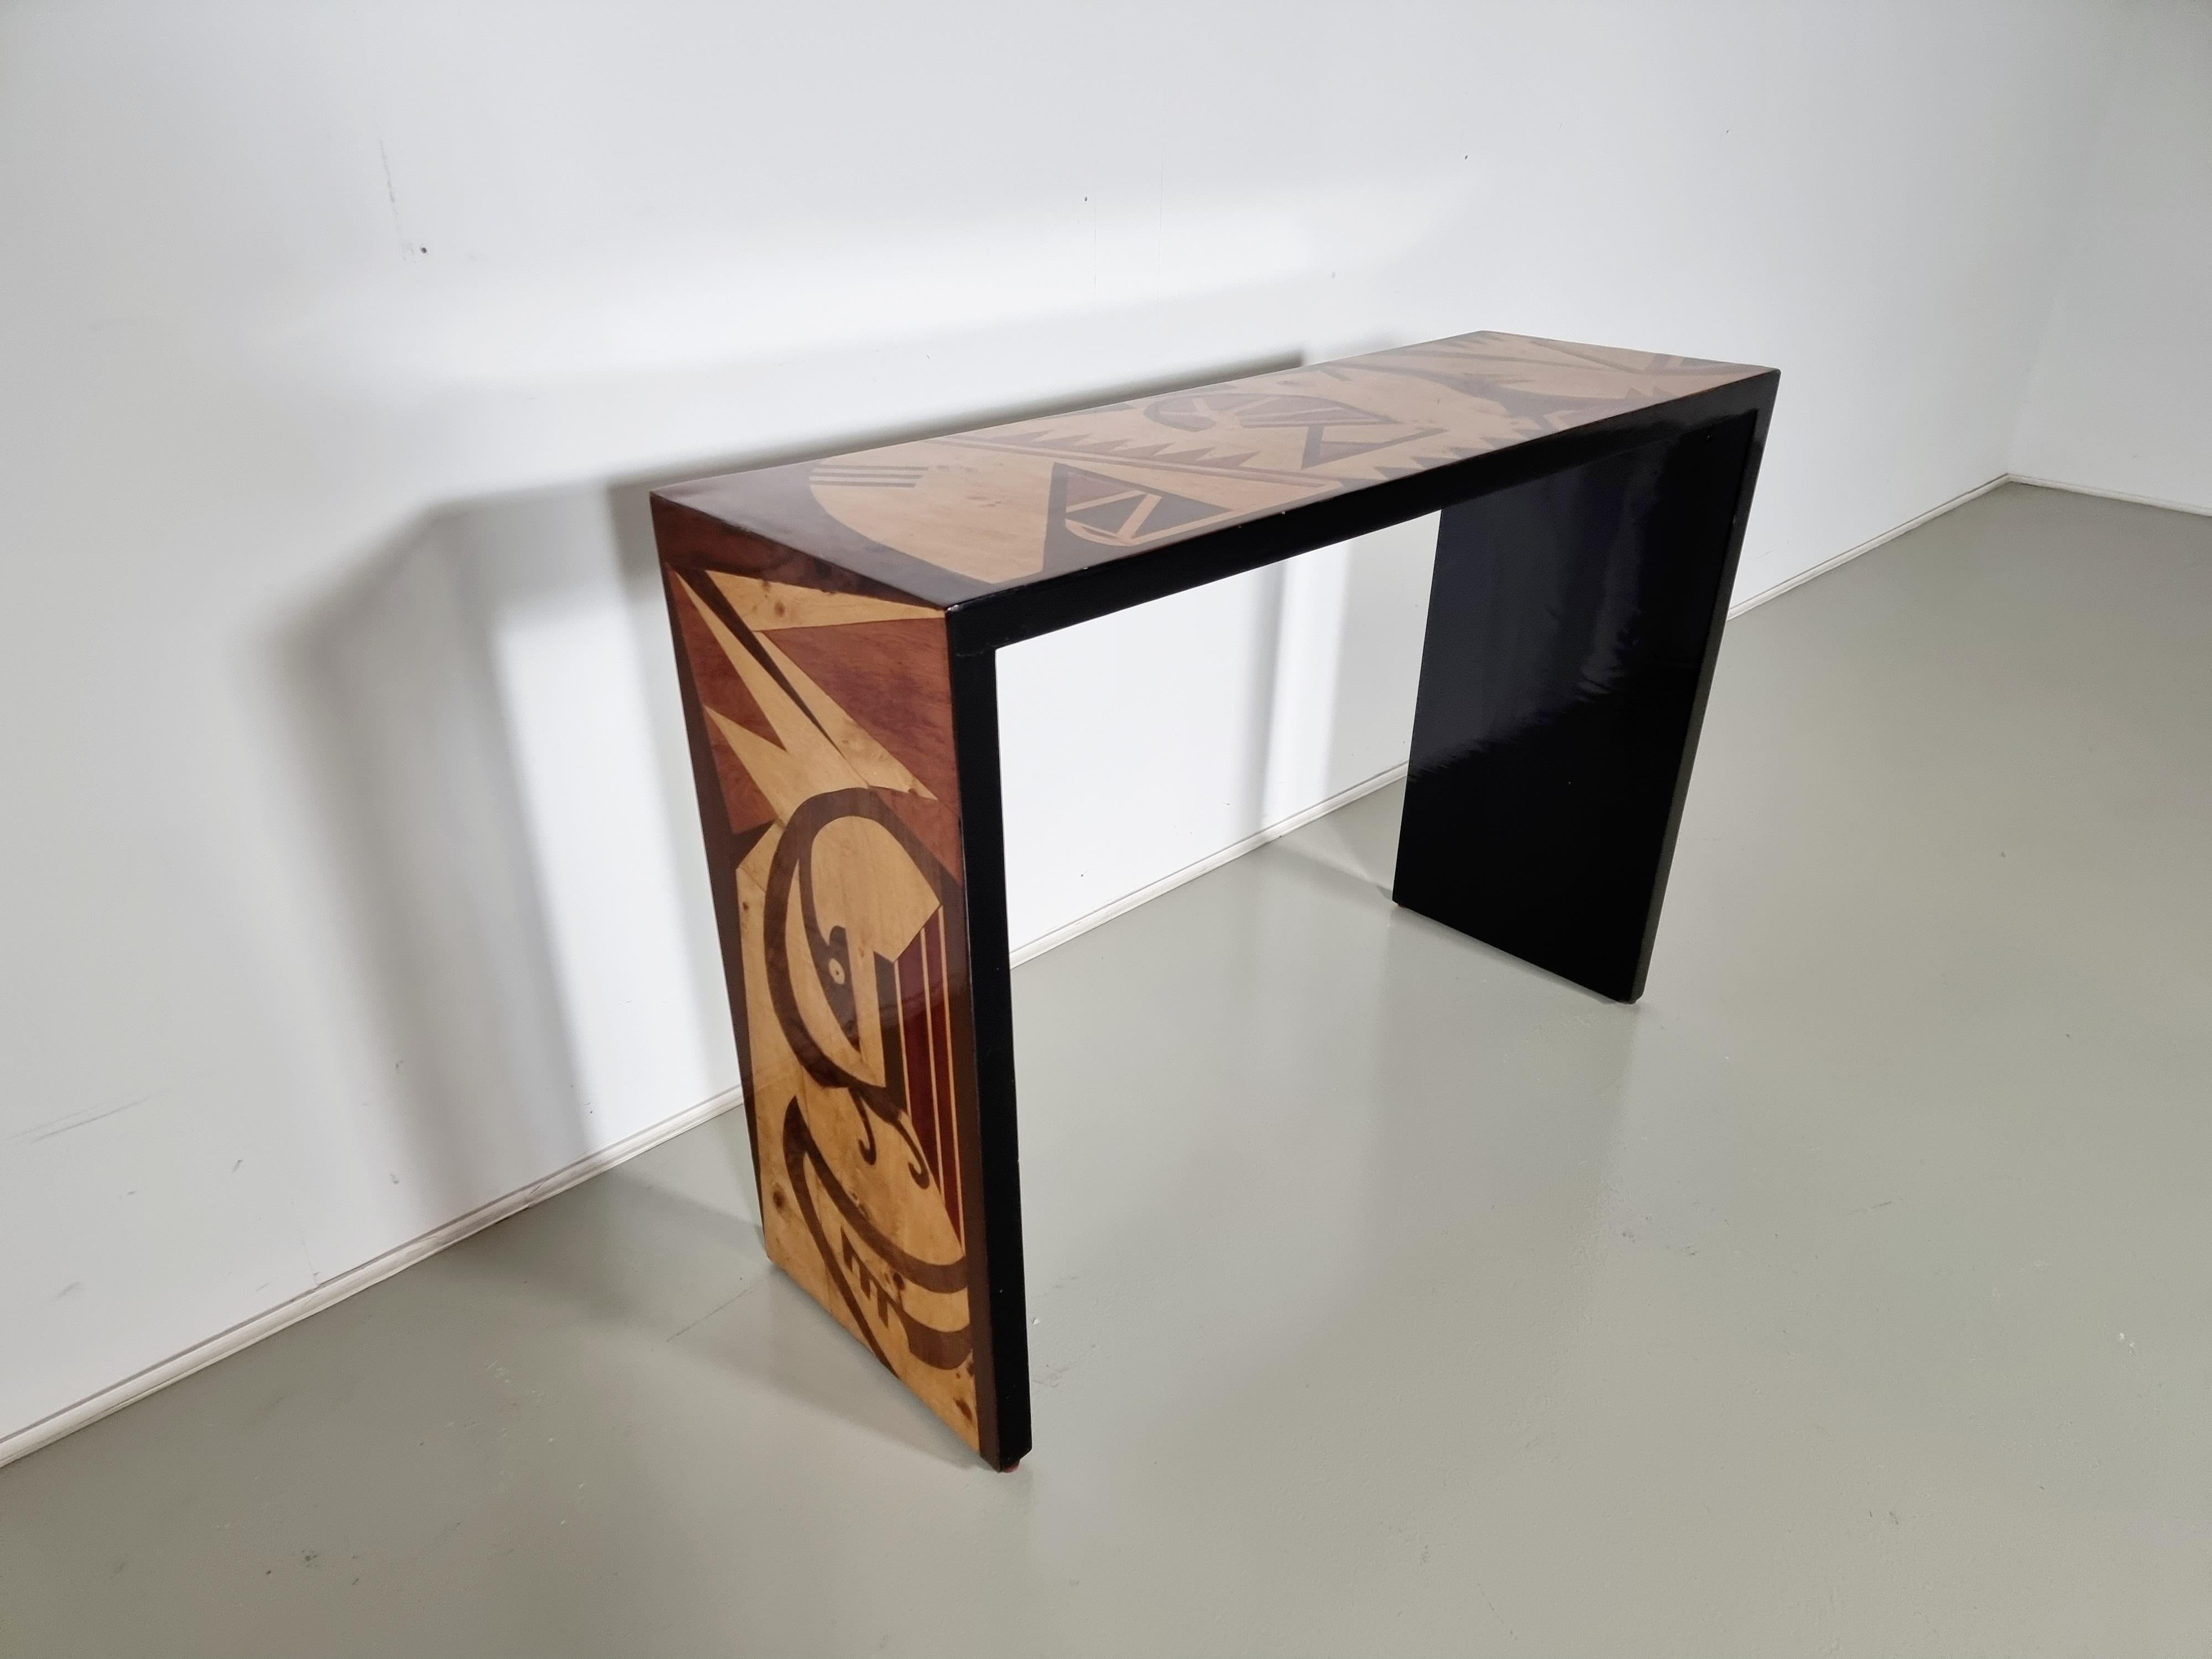 Outstanding vintage console table in richly inlaid wood, creating a colorful geometric pattern. Designed and handmade in Italy, 1970s

This item is perfect for any room, ideal as a welcome in a hallway, or equally as fitting in a dining and living